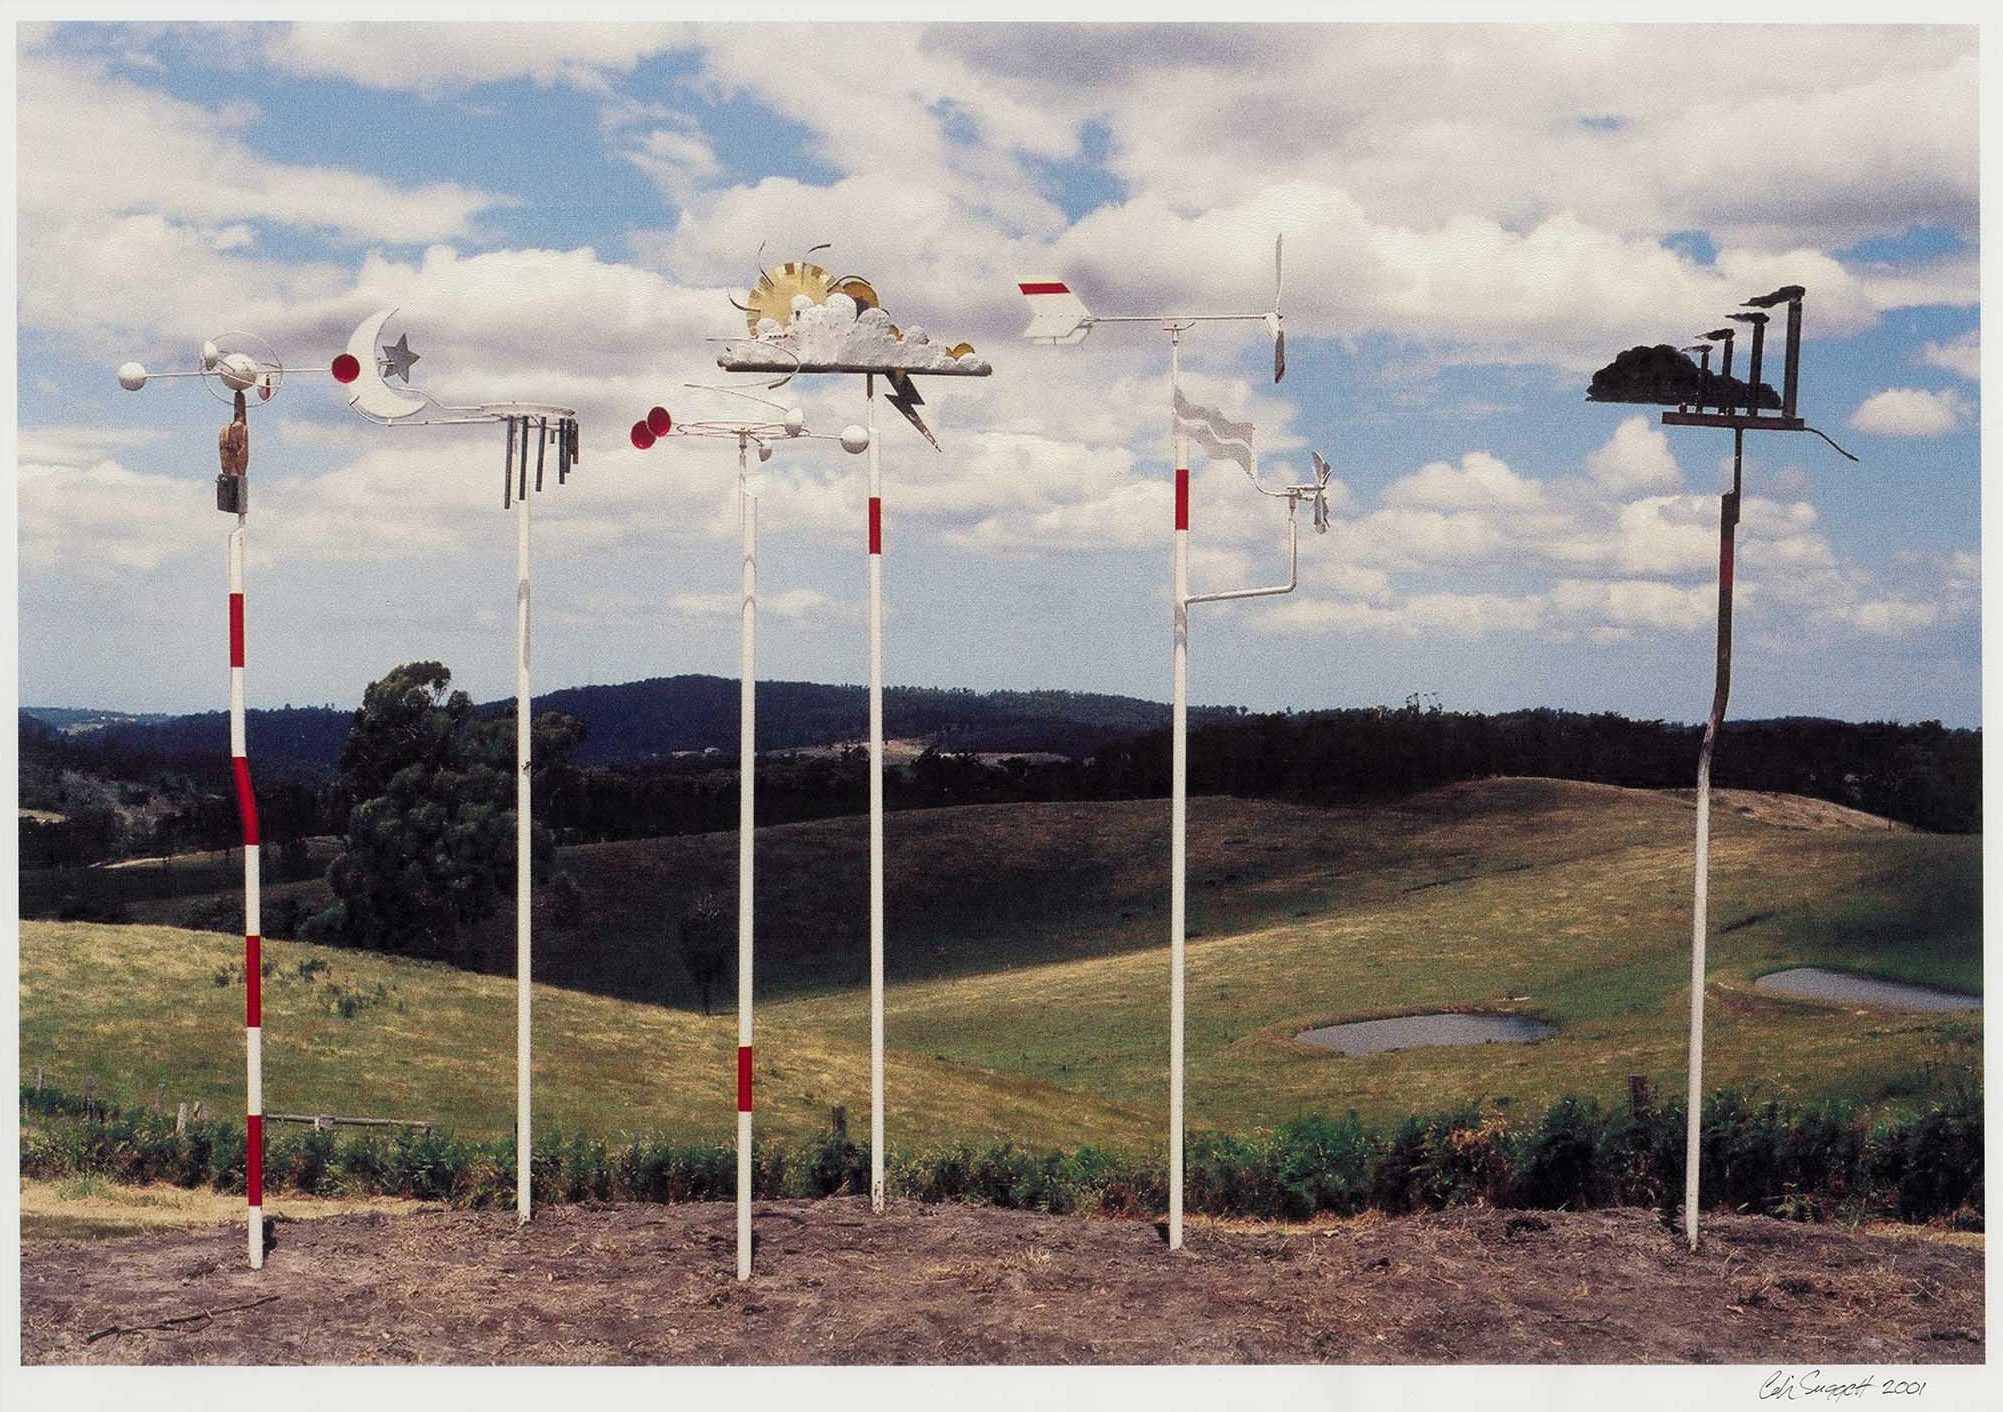 Colin Suggett, Something in the wind, 1989, Colour photograph, 70 x 92 cm framed, Colin Suggett Collection, gift of the artist to Latrobe Regional Gallery, 2001.